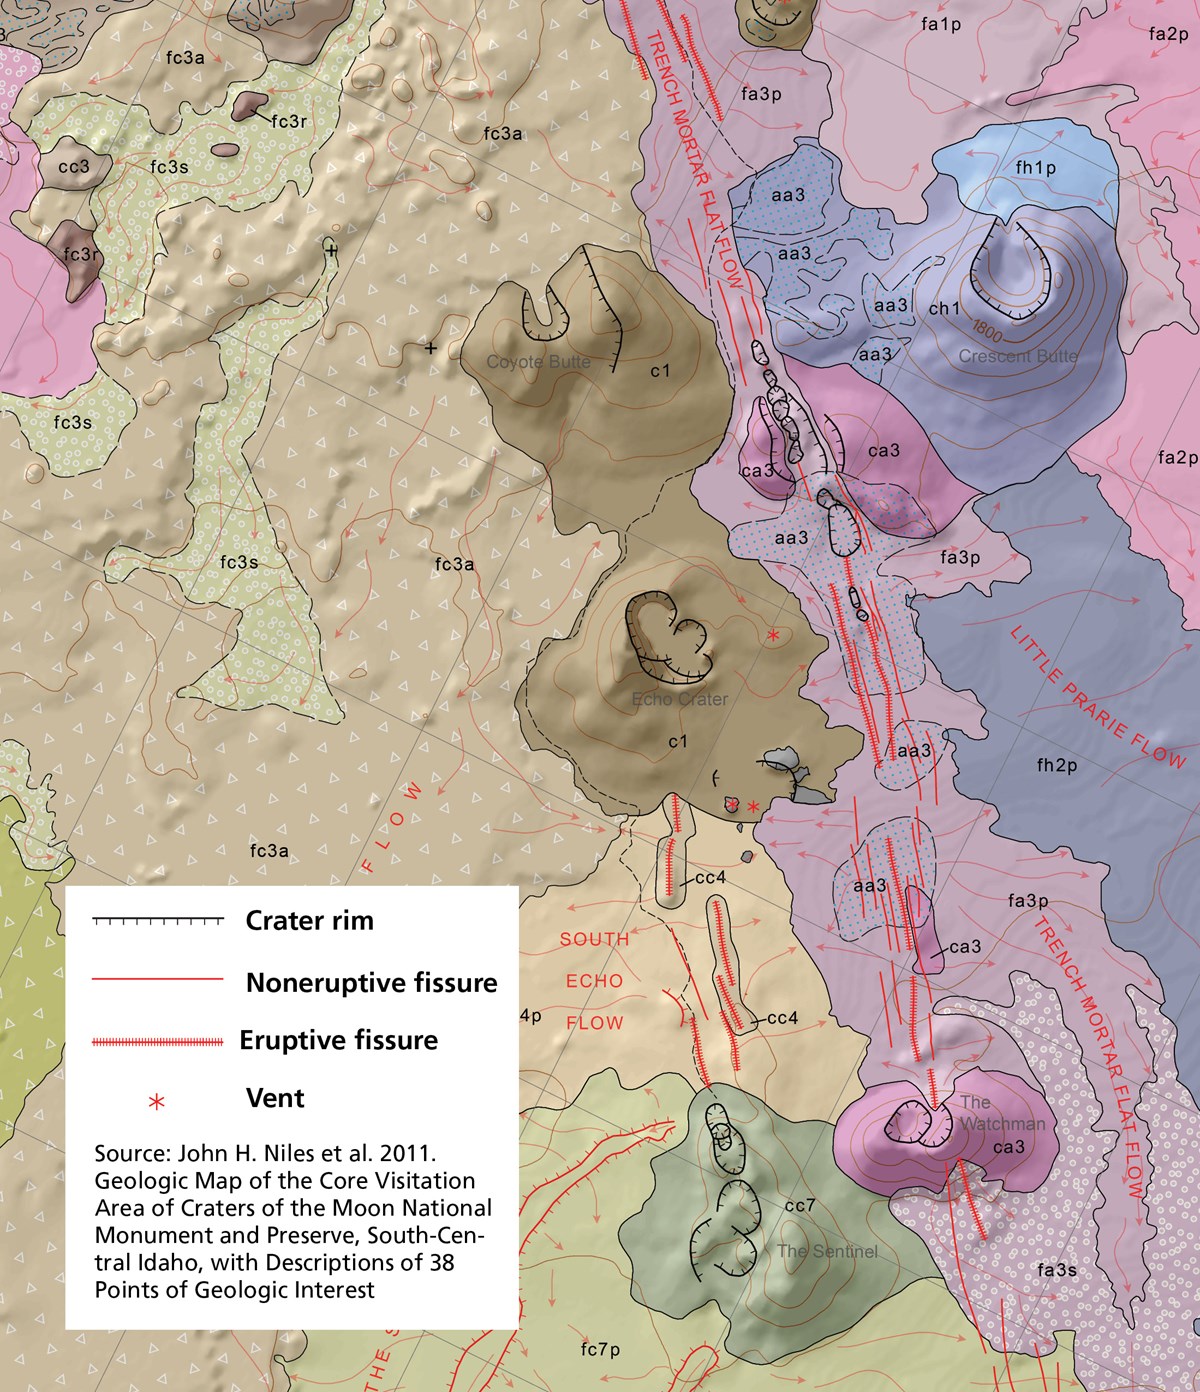 geologic map of a portion of craters of the moon national monument and preserve showing several volcanic features